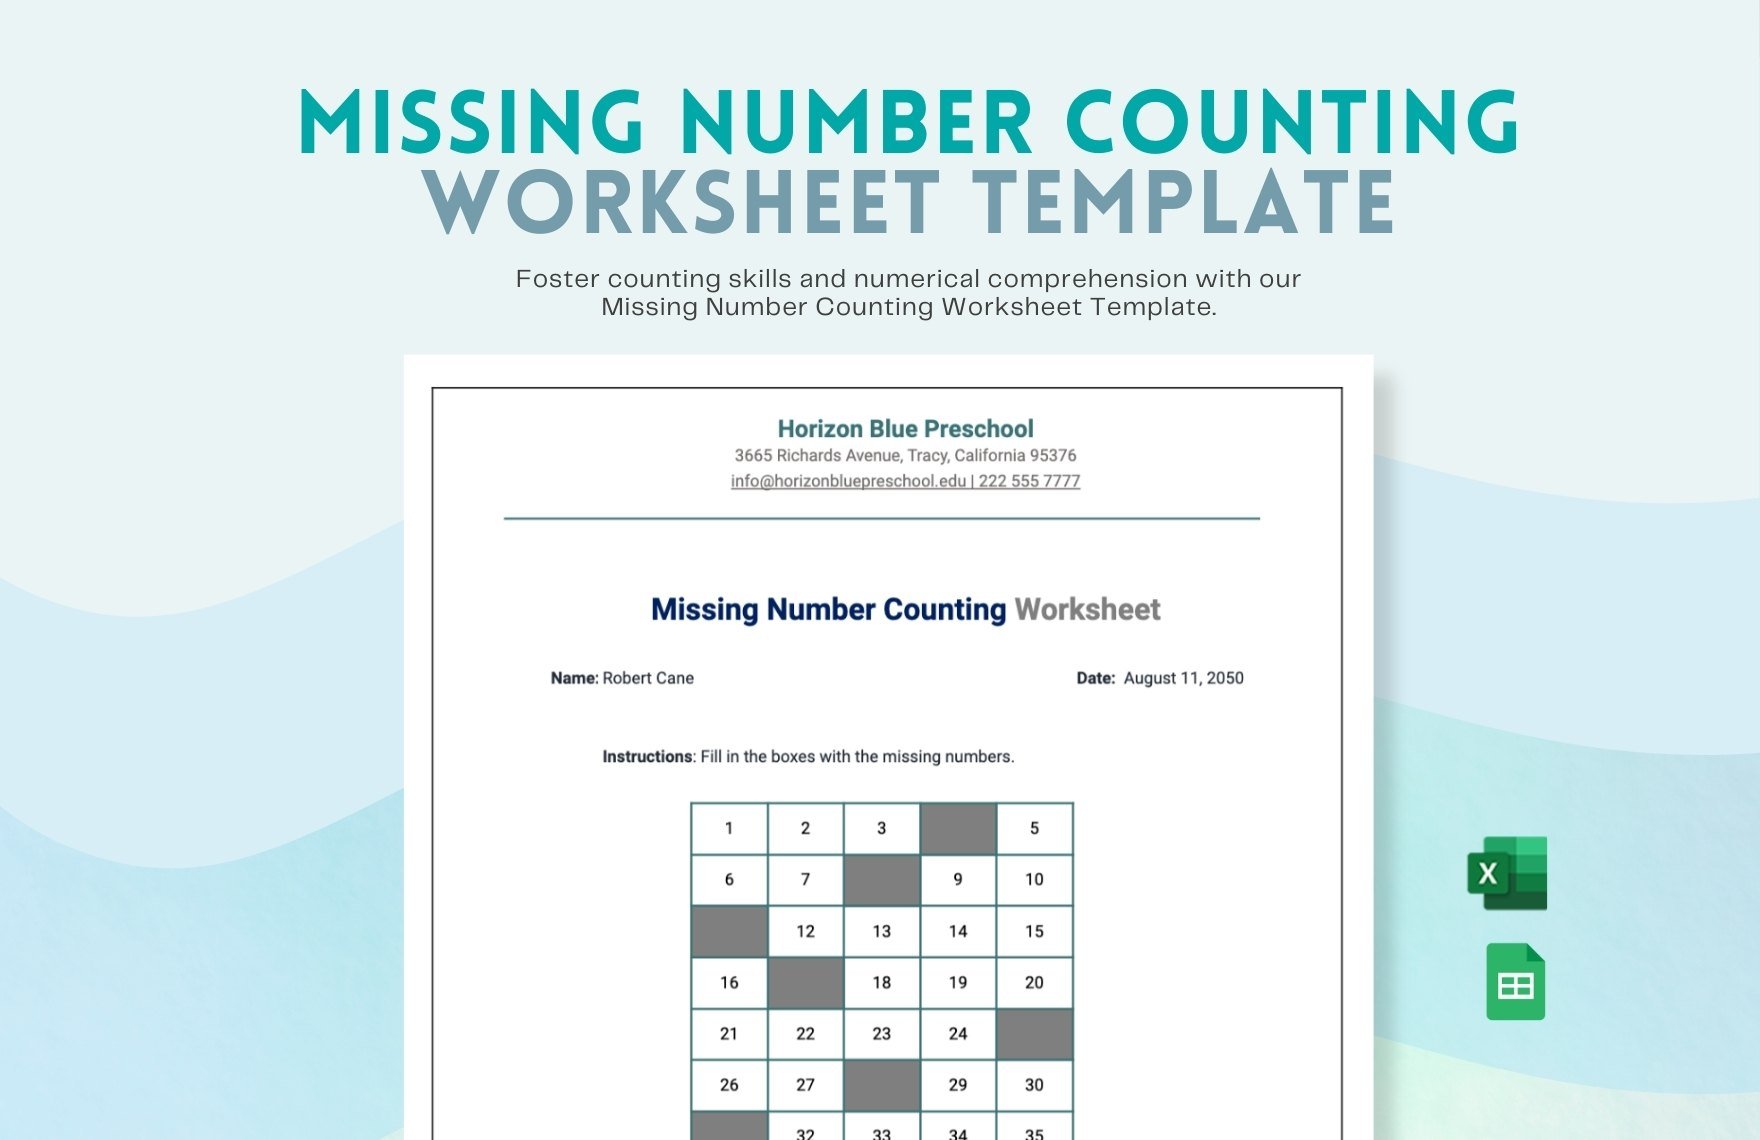 Missing Number Counting Worksheet in Excel, Google Sheets